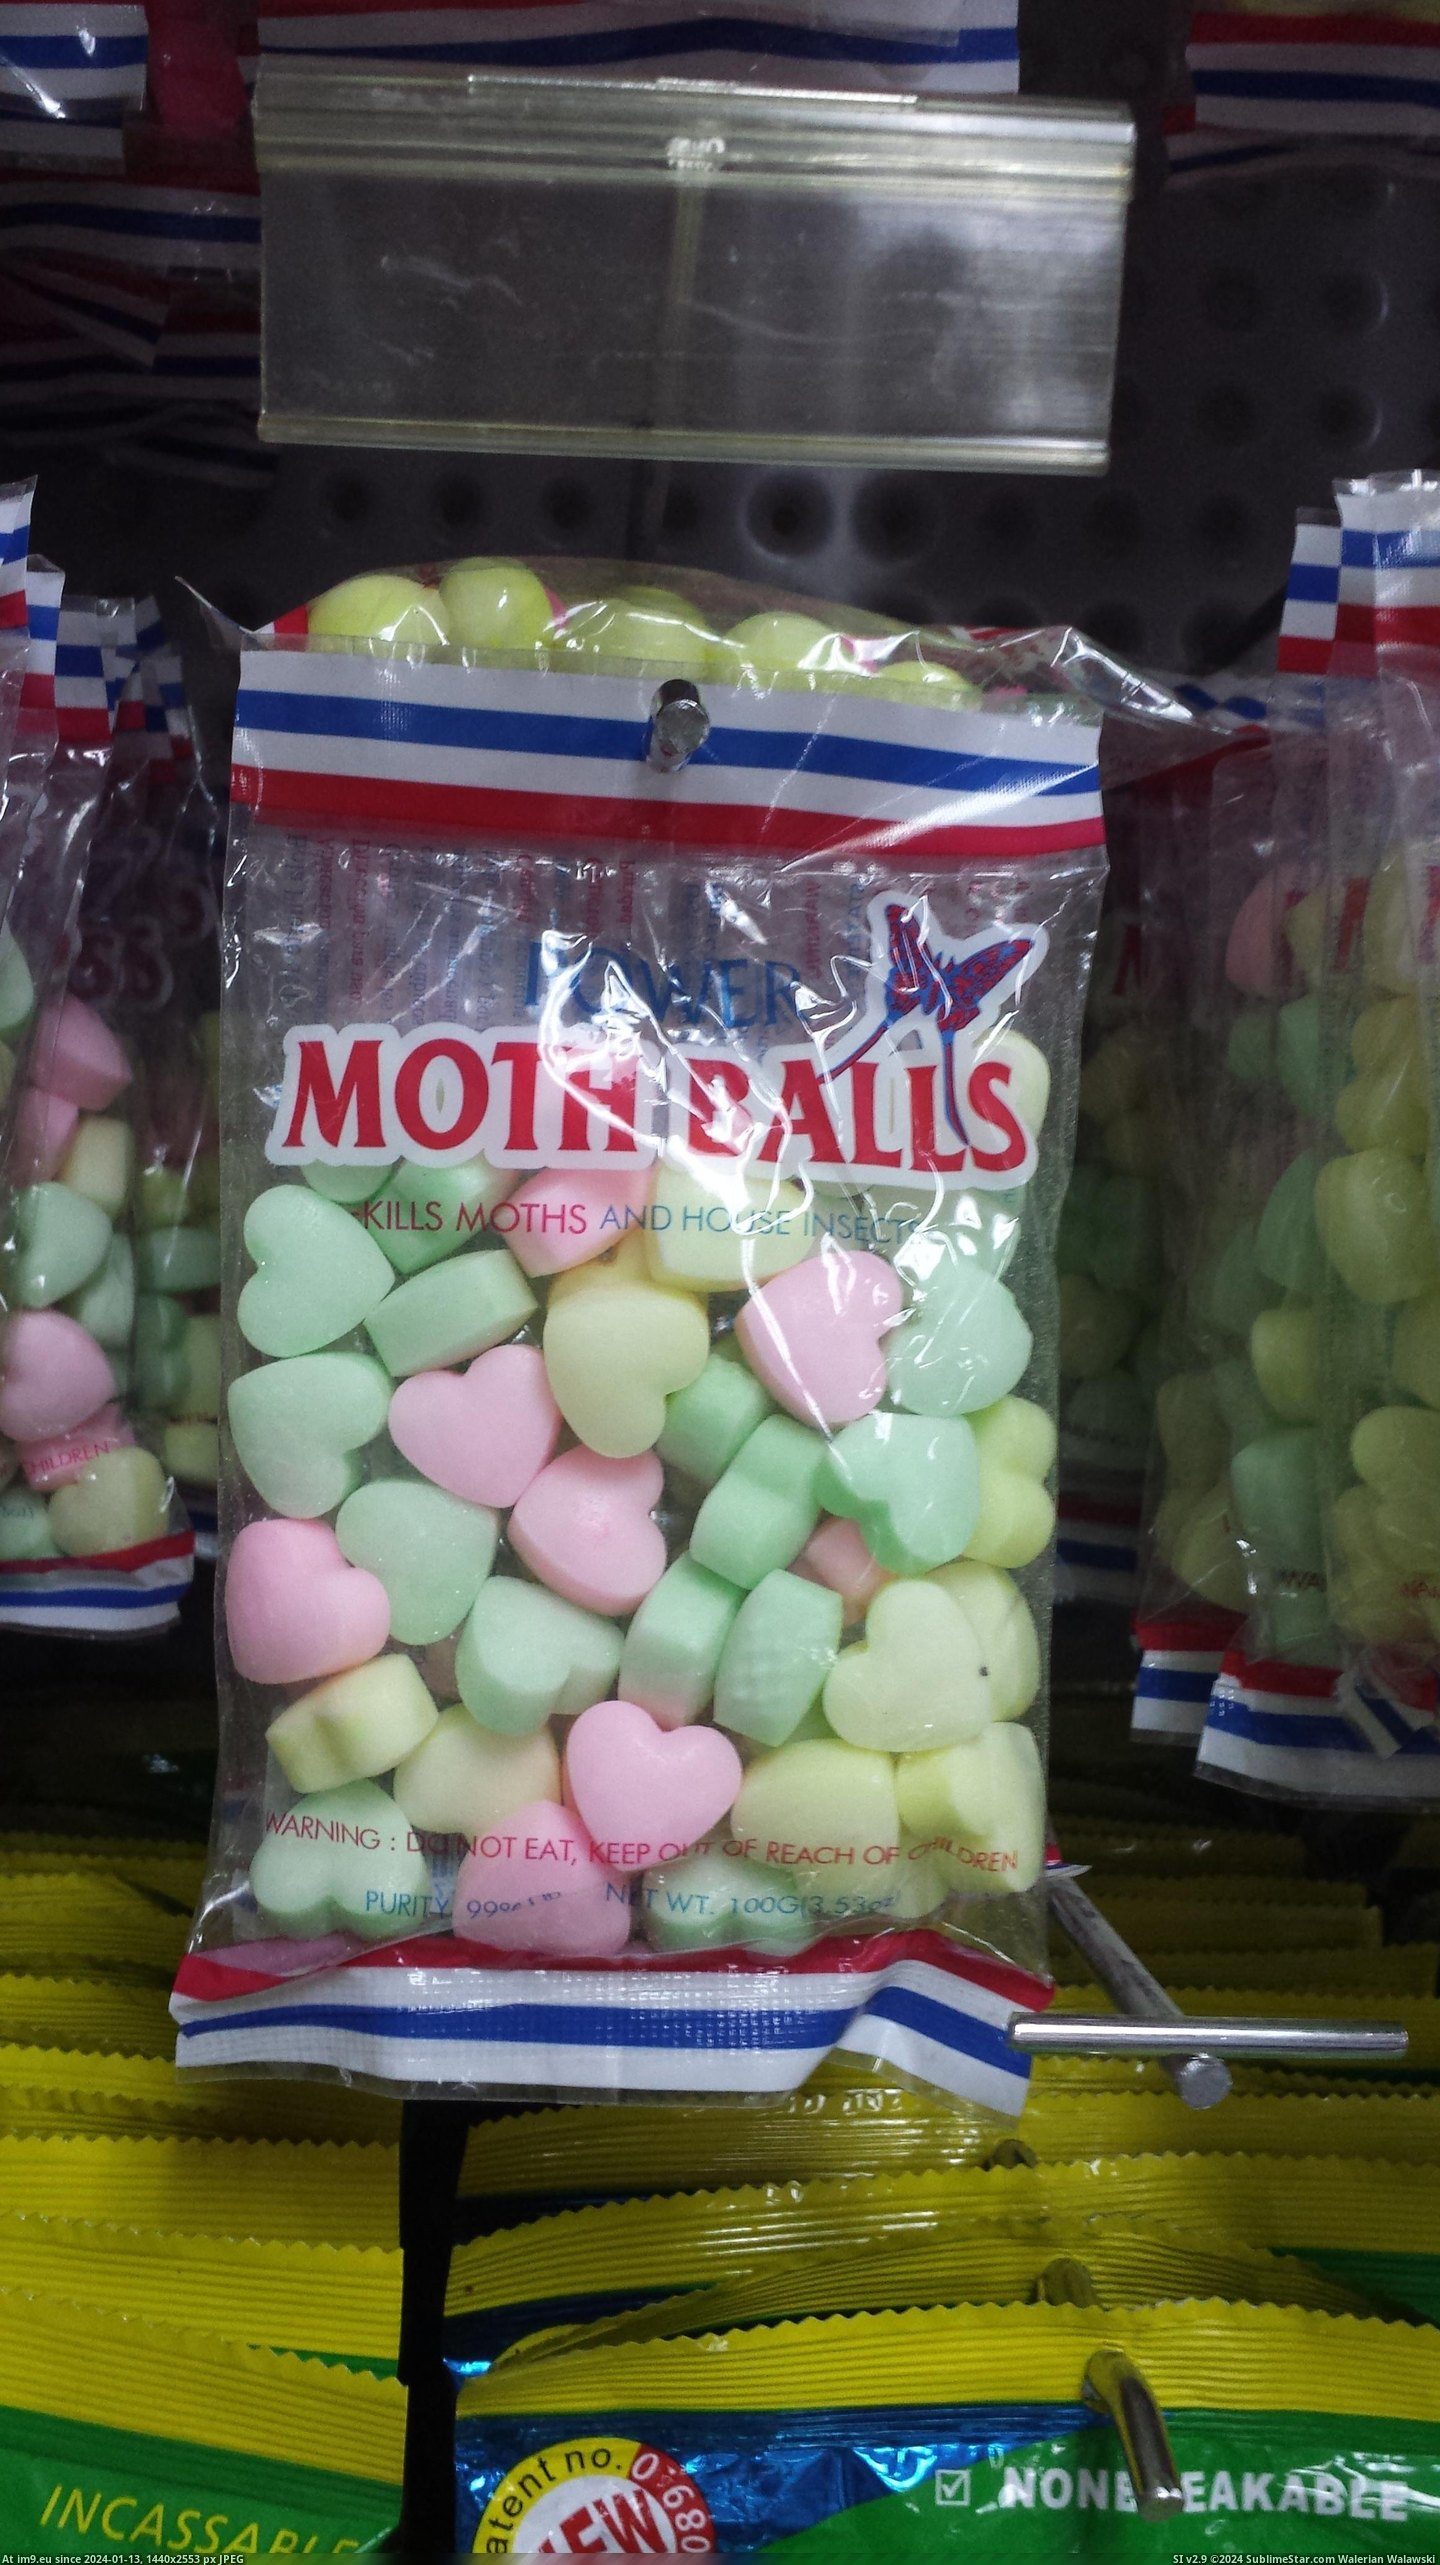 #Wtf #Candy #Sell #Obvious #Marketing #Papua #Decision #Guinea #Issues [Wtf] In Papua New Guinea they sell mothballs that look like candy. Can't see any obvious issues with this marketing decision, e Pic. (Image of album My r/WTF favs))